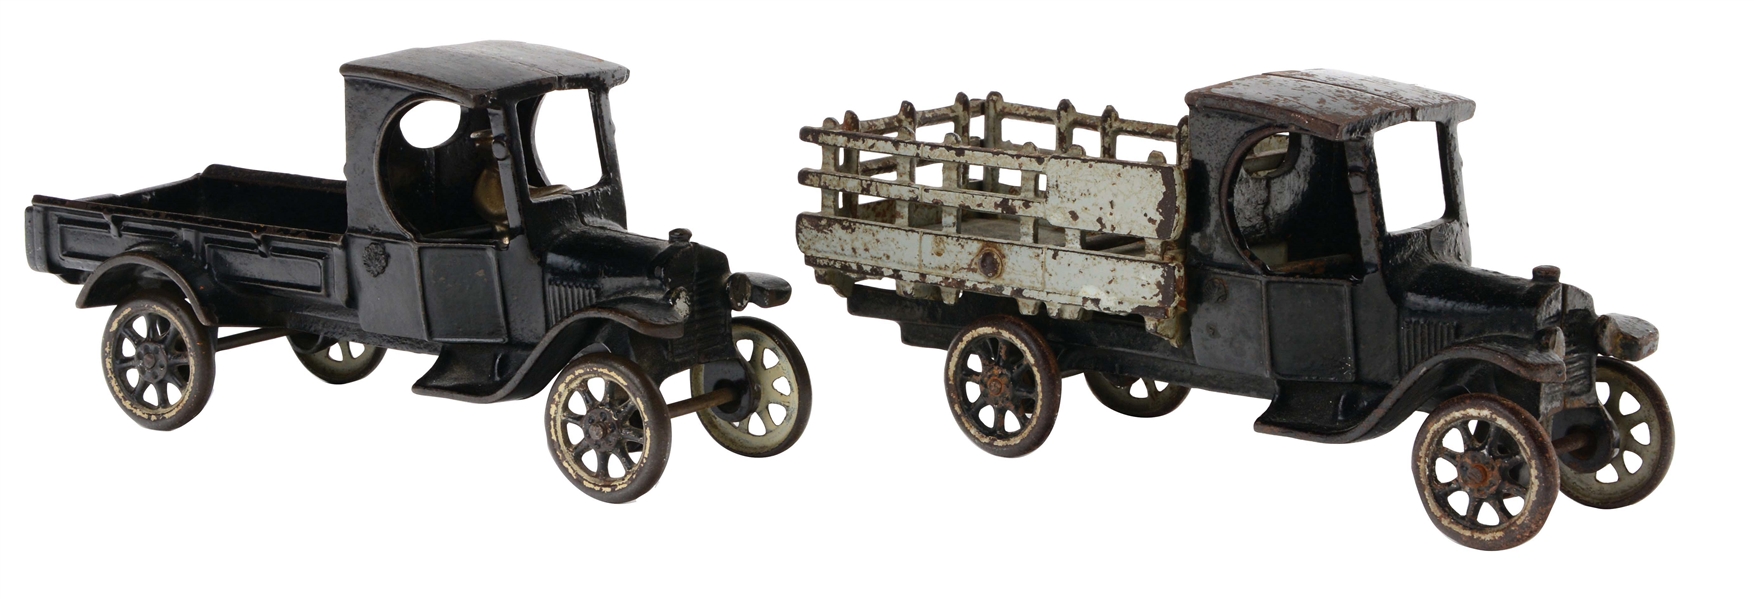 LOT OF 2: ARCADE EARLY 1920S FORD TRUCKS.